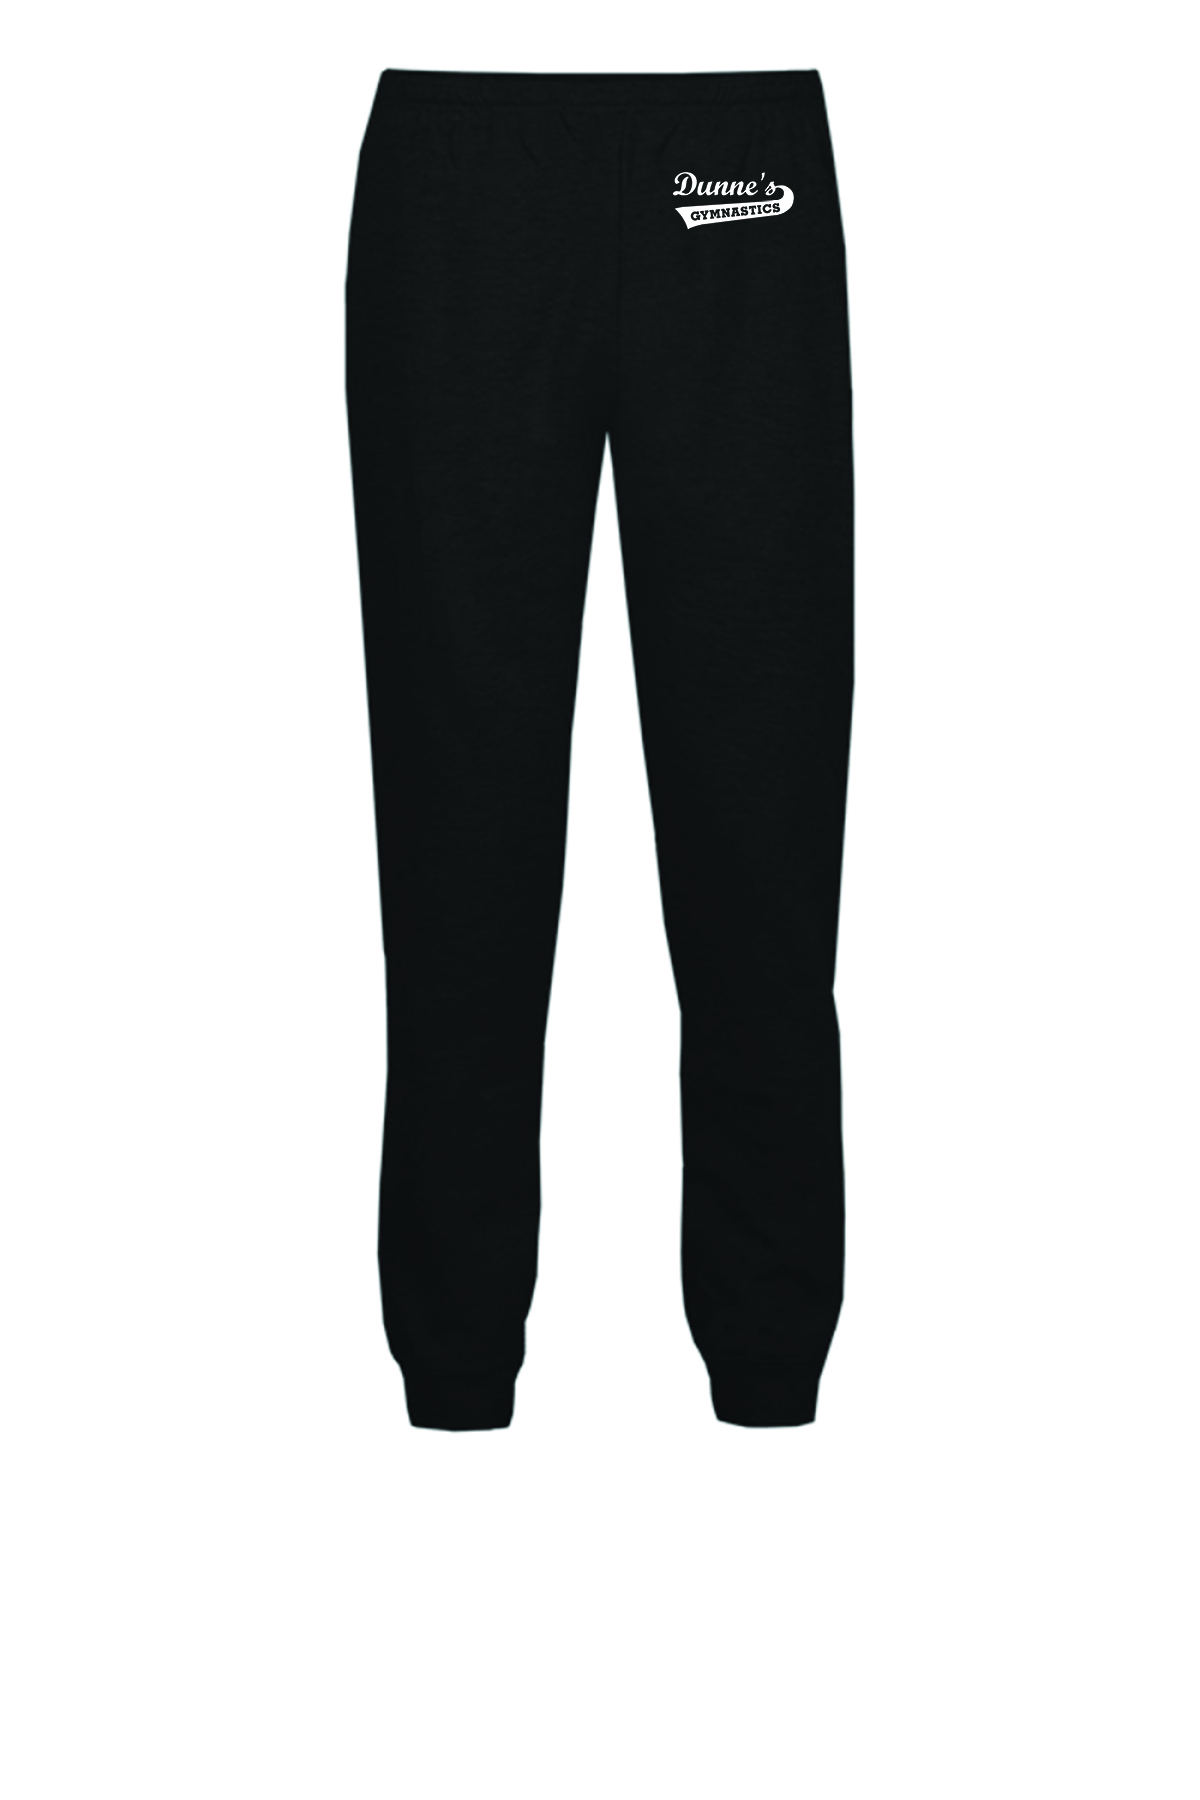 Holloway - Youth Athletic Fleece Joggers with Dunne's Logo